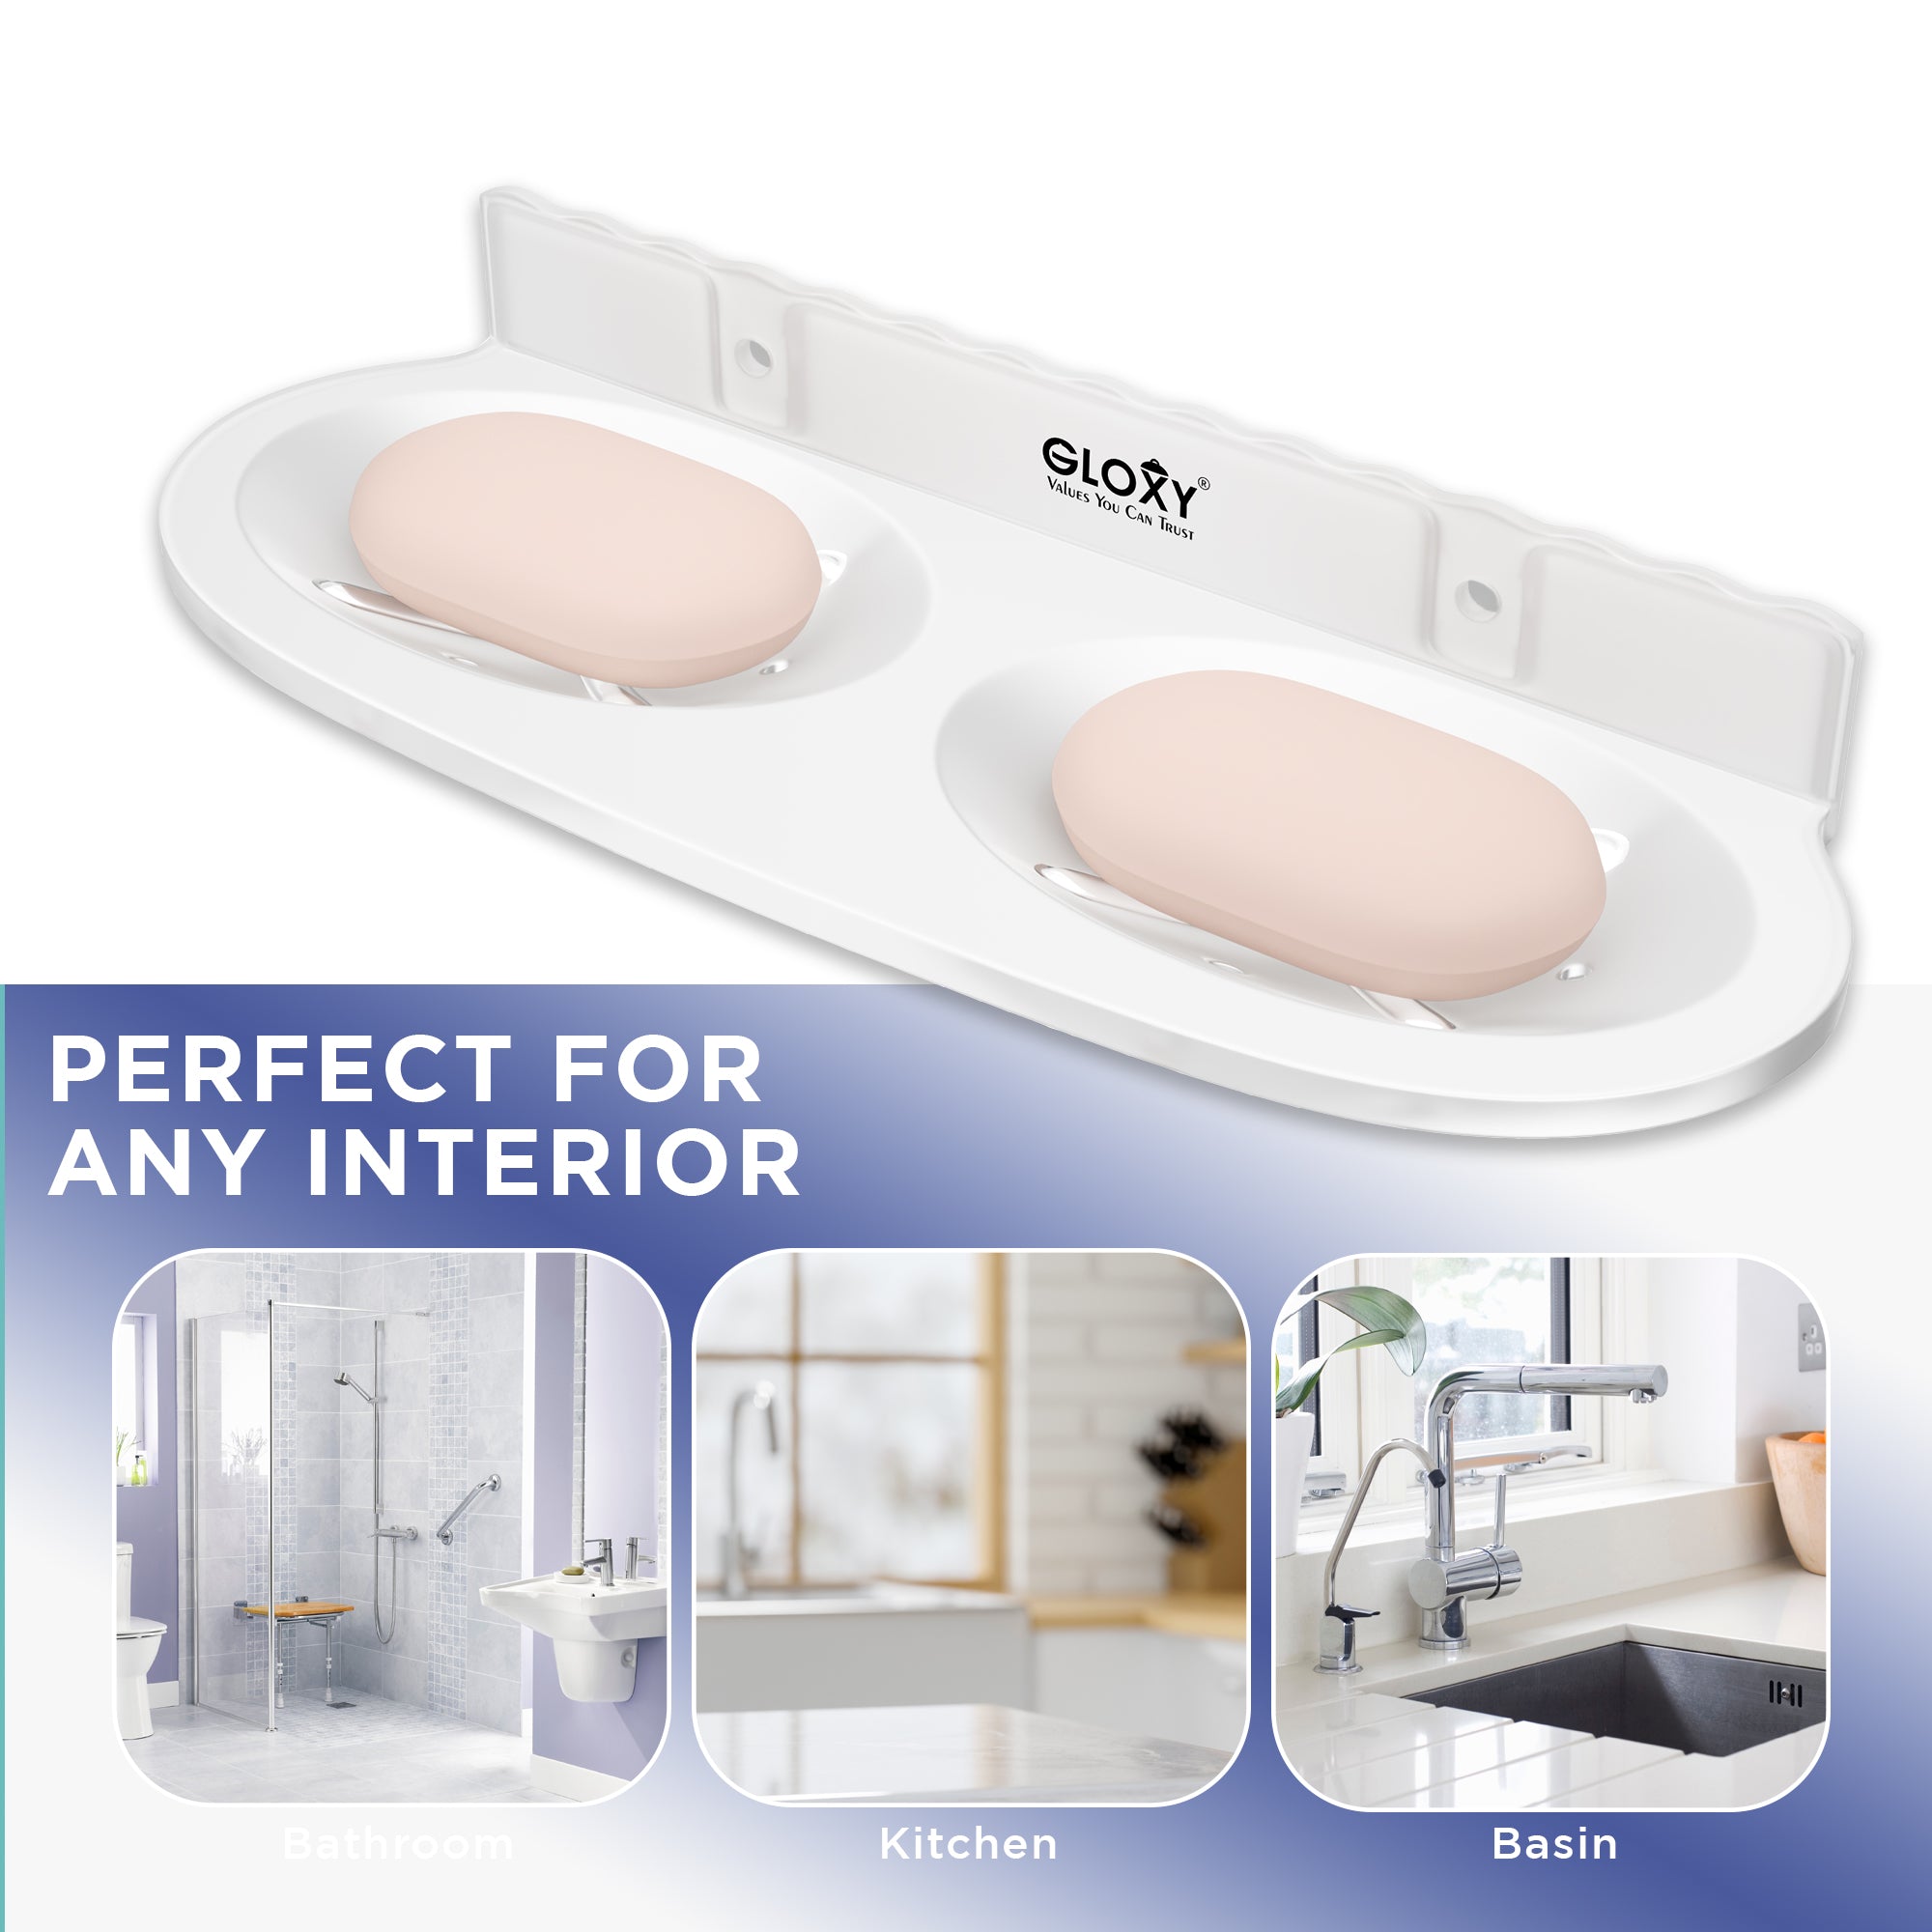 GLOXY® Unbreakable Oval shape Double Soap Dish for Bathroom & Kitchen